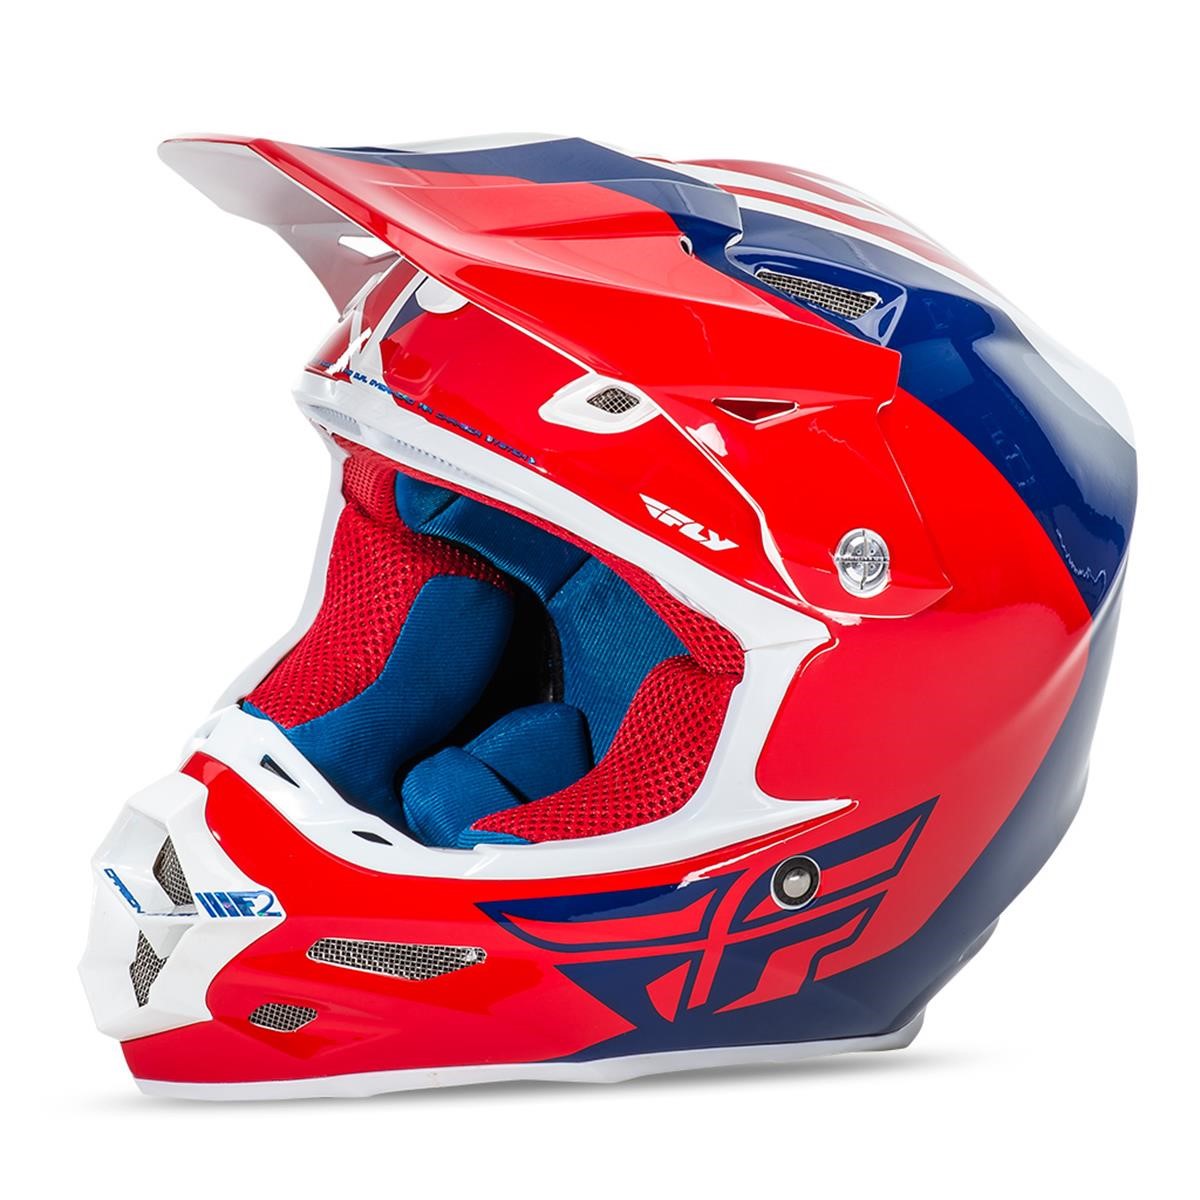 Fly Racing Helm F2 Carbon Pure Rot/Blau/Weiß